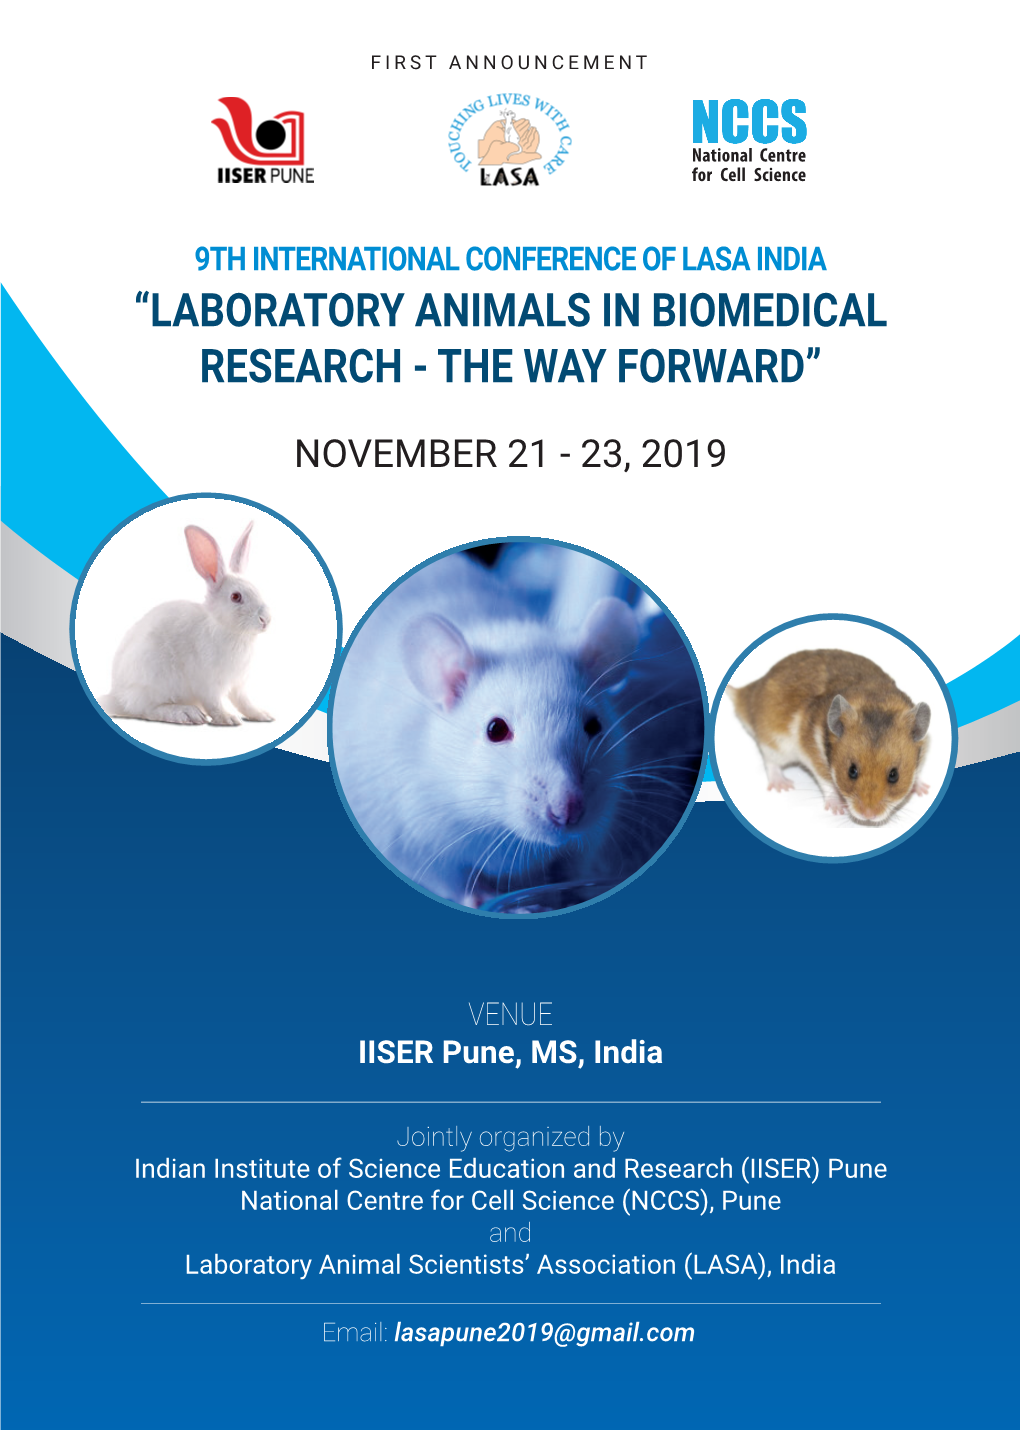 “Laboratory Animals in Biomedical Research - the Way Forward”